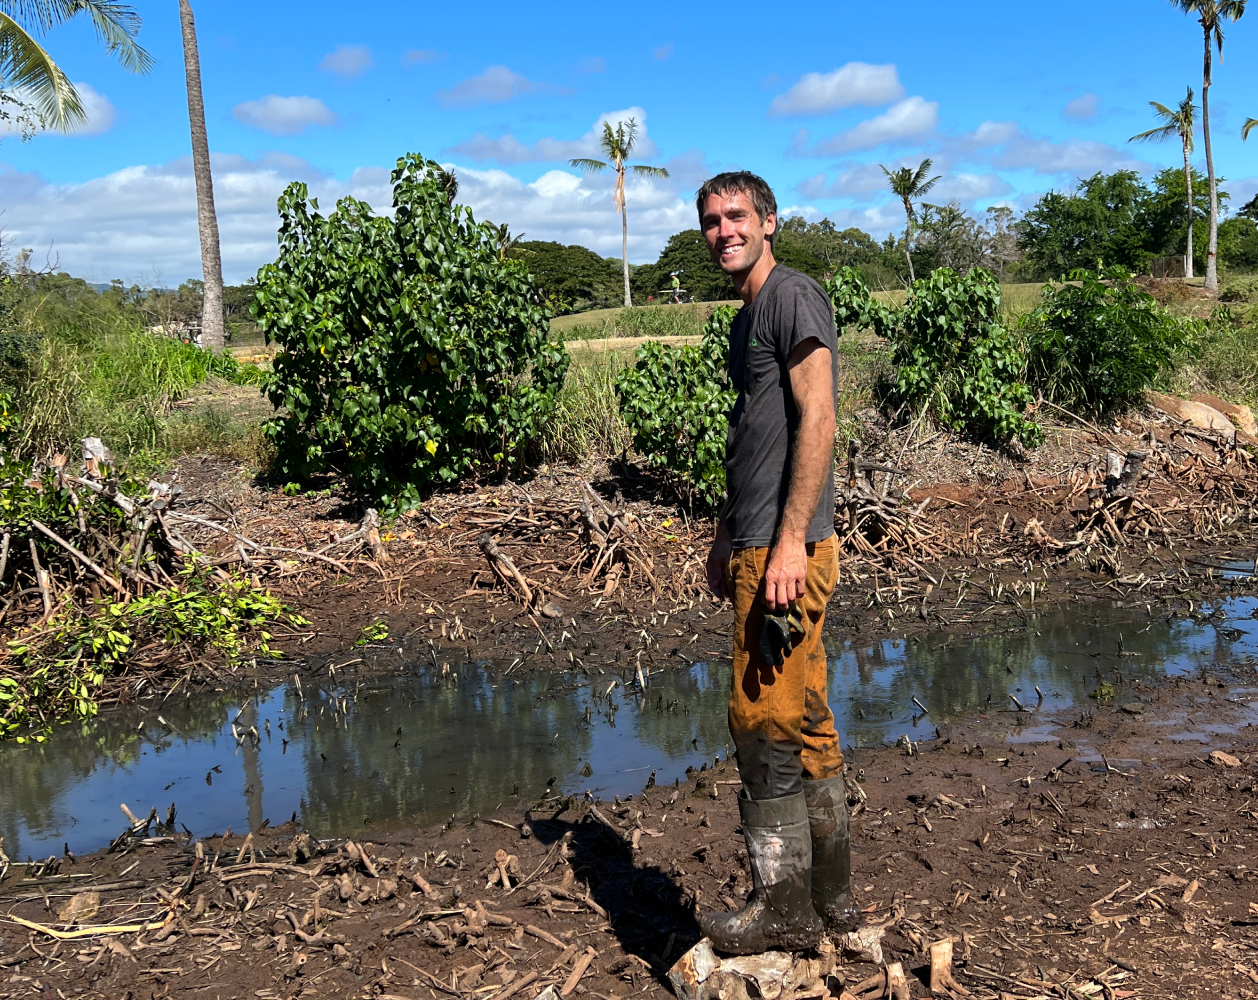 Smiling man in muddy boots standing in a field with palm trees and blue sky.